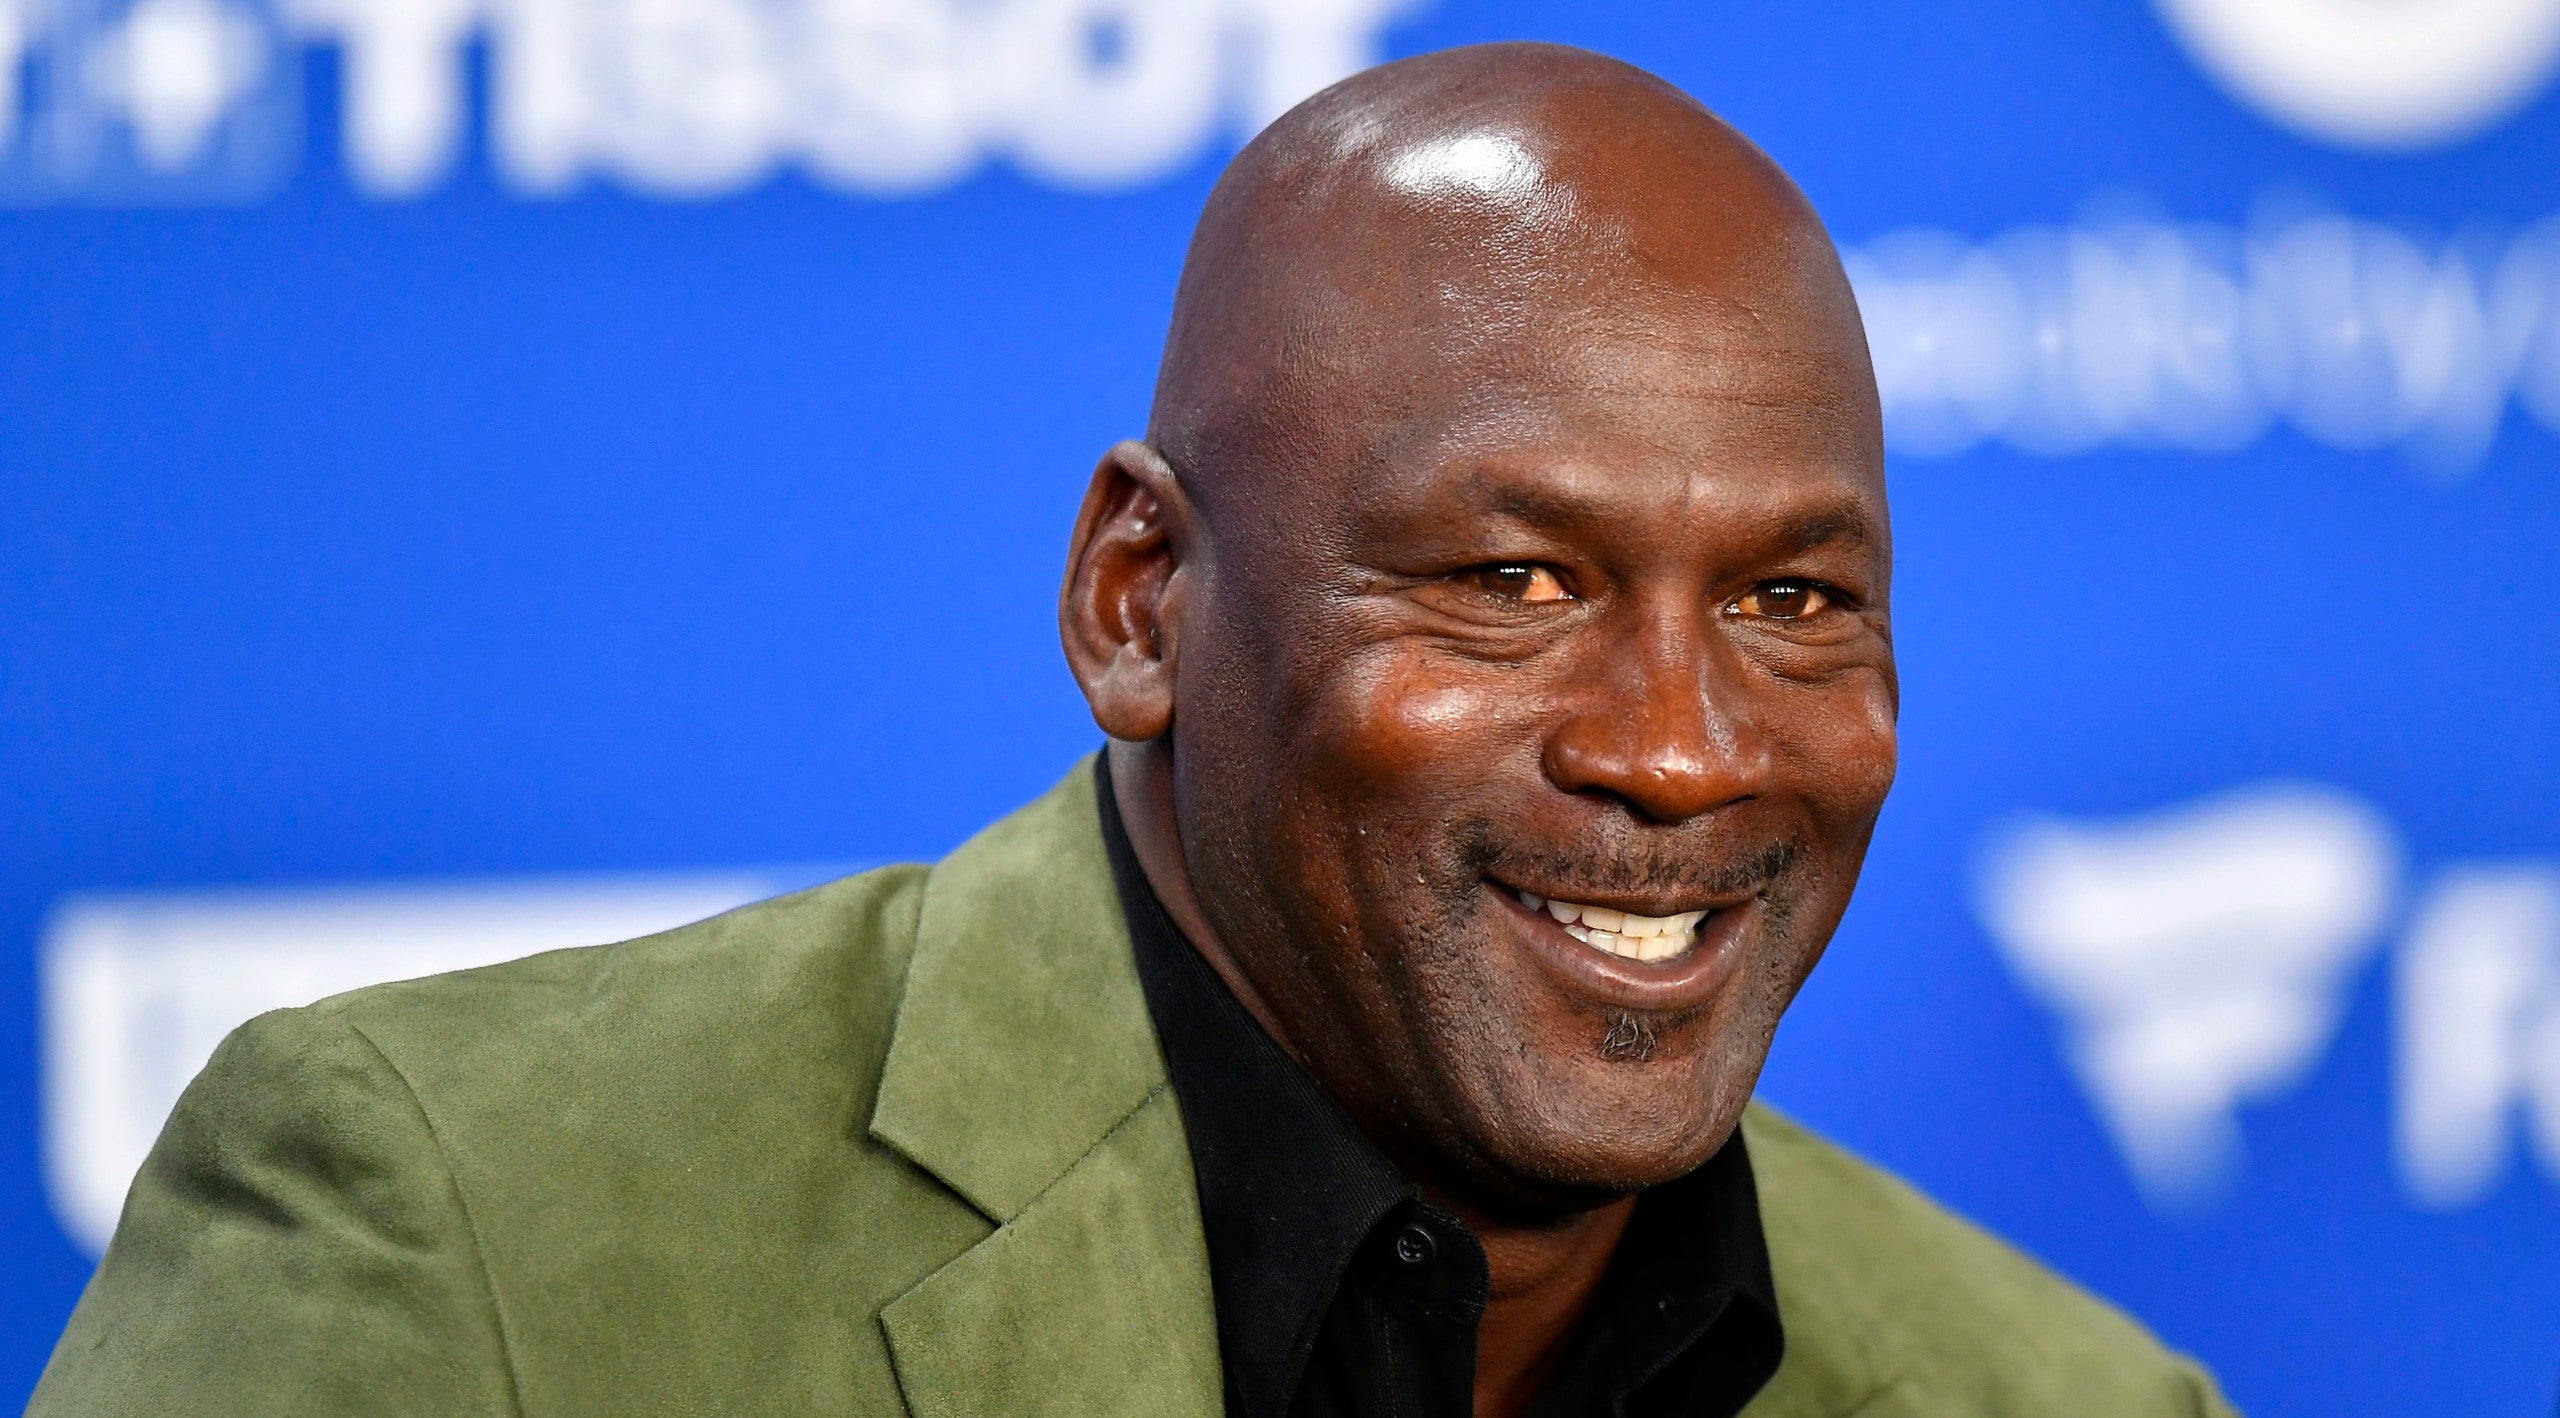 Michael Jordan was offered $100 million to appear at event for 2 hours. He said - WISH-TV | News | Indiana Weather | Indiana